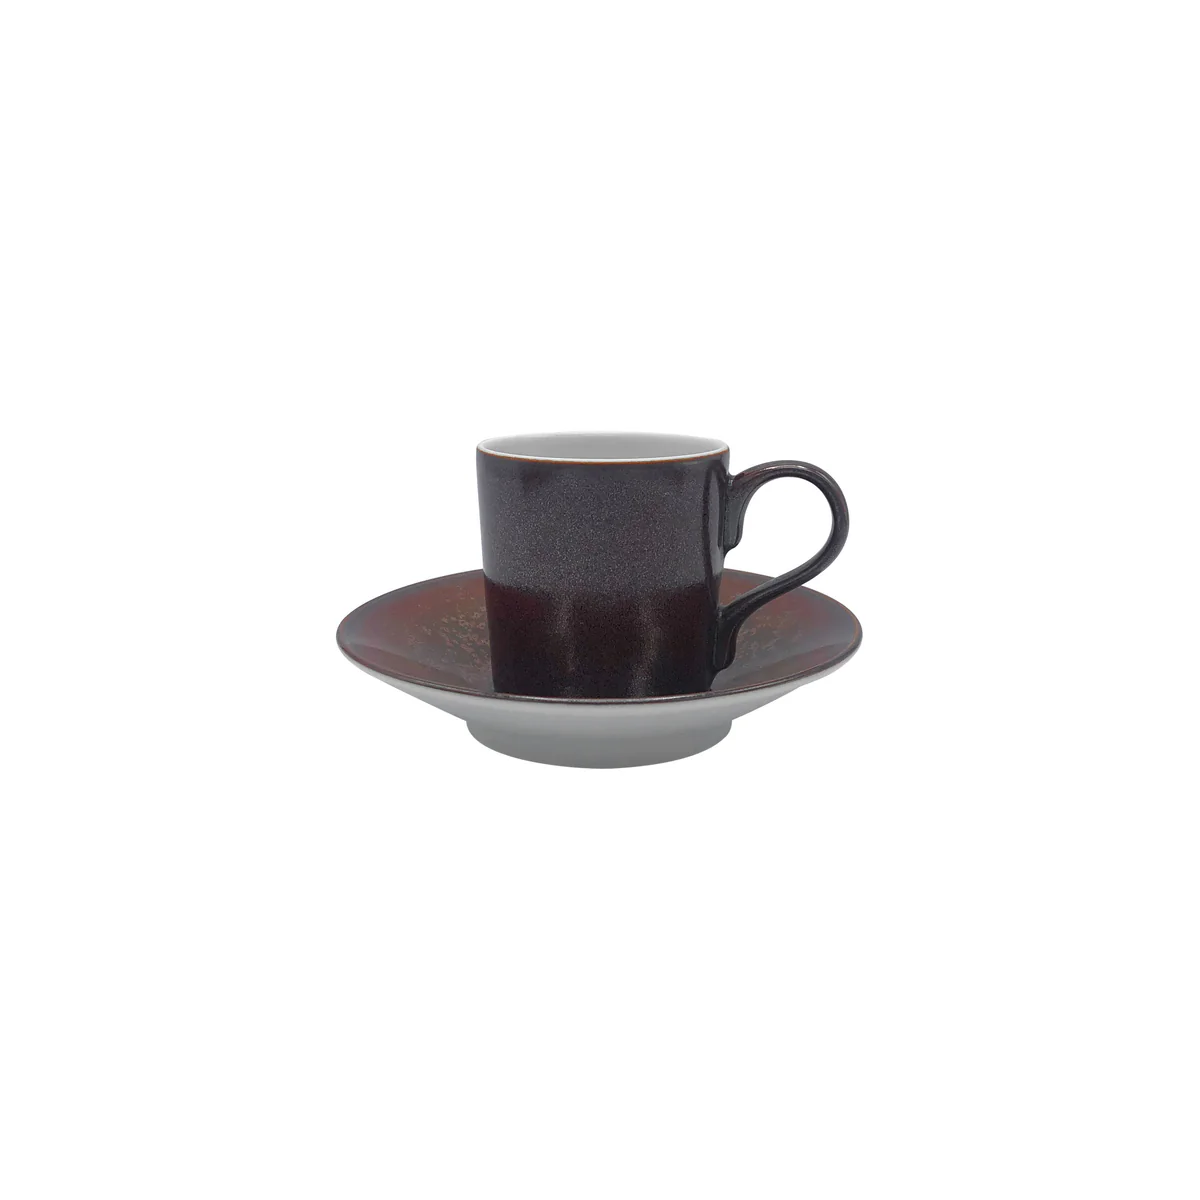 RED GRANITE - Coffee set (cup & saucer)